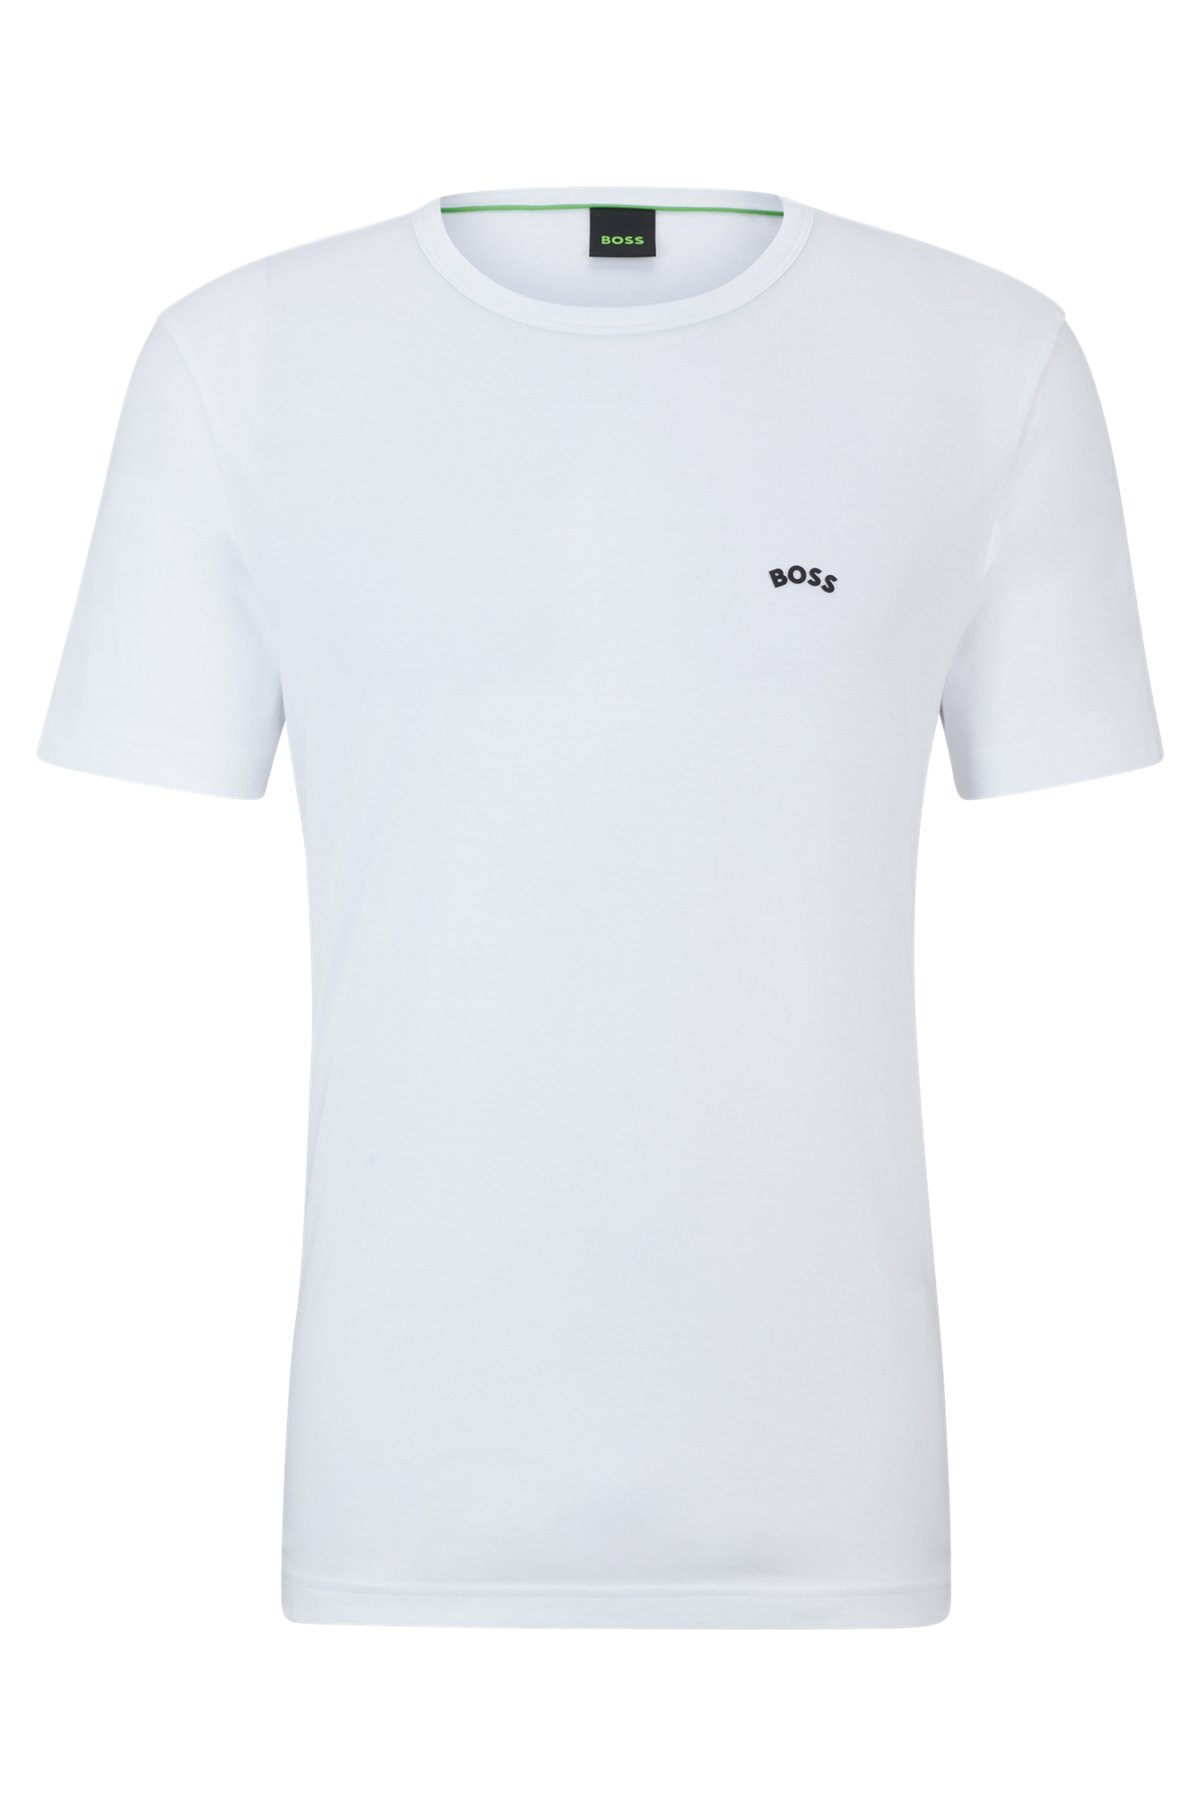 Cotton-jersey T-shirt with curved logo, White